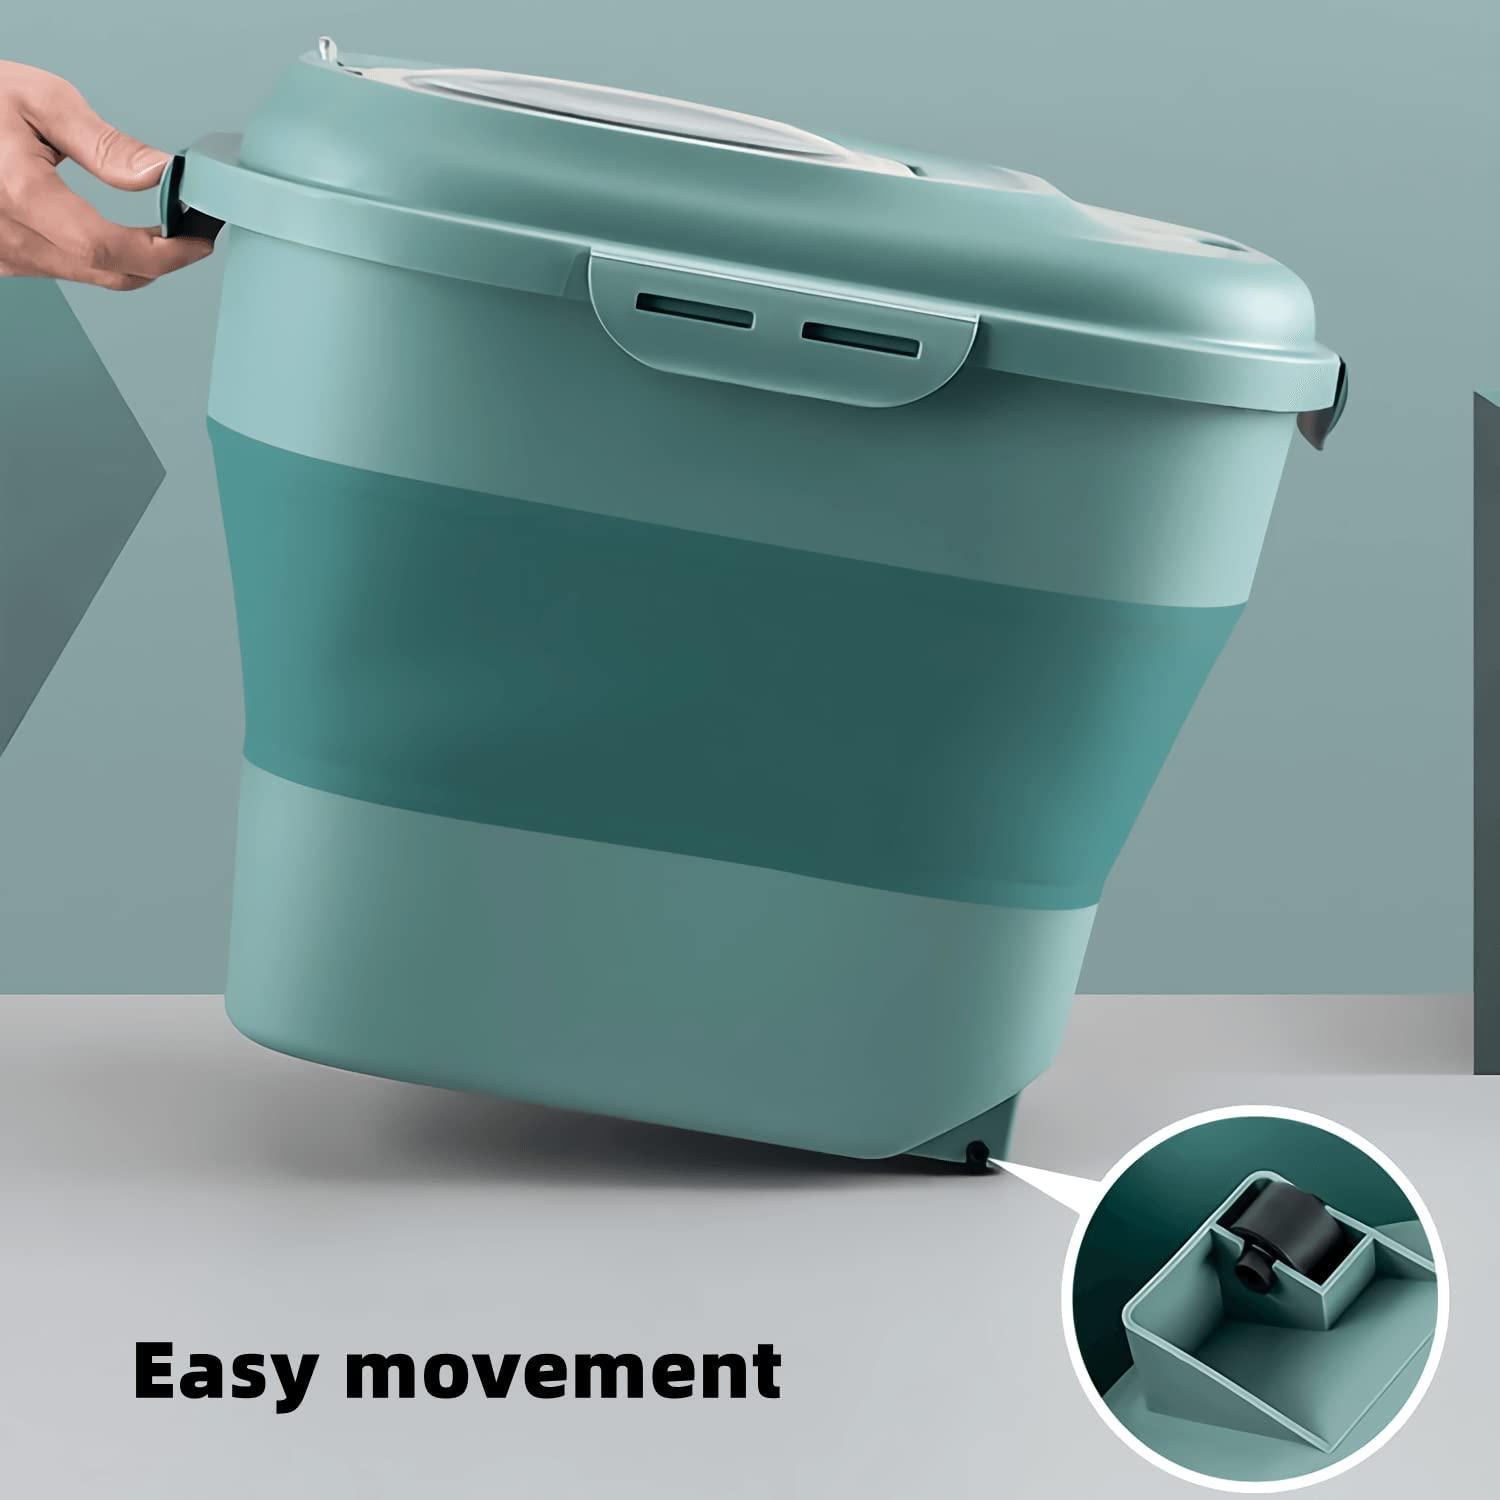 4 Reasons to Use Plastic Moving Containers or Rental Bins! - UtilityHound